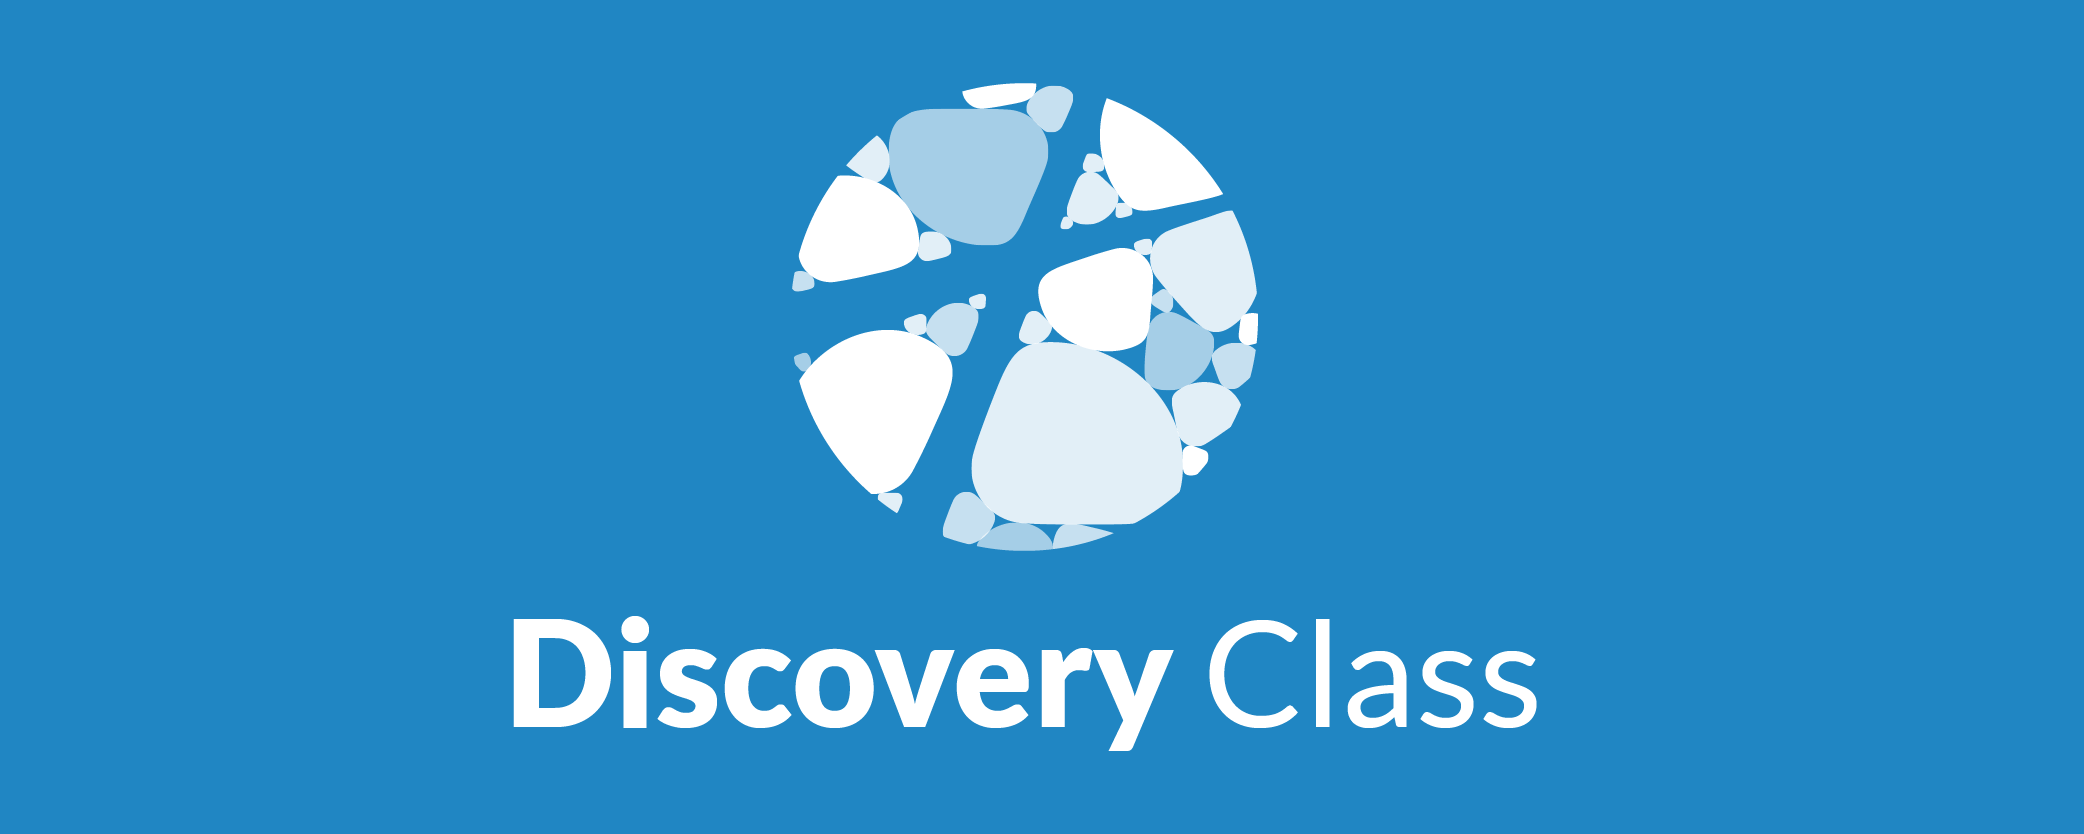 Discovery Class